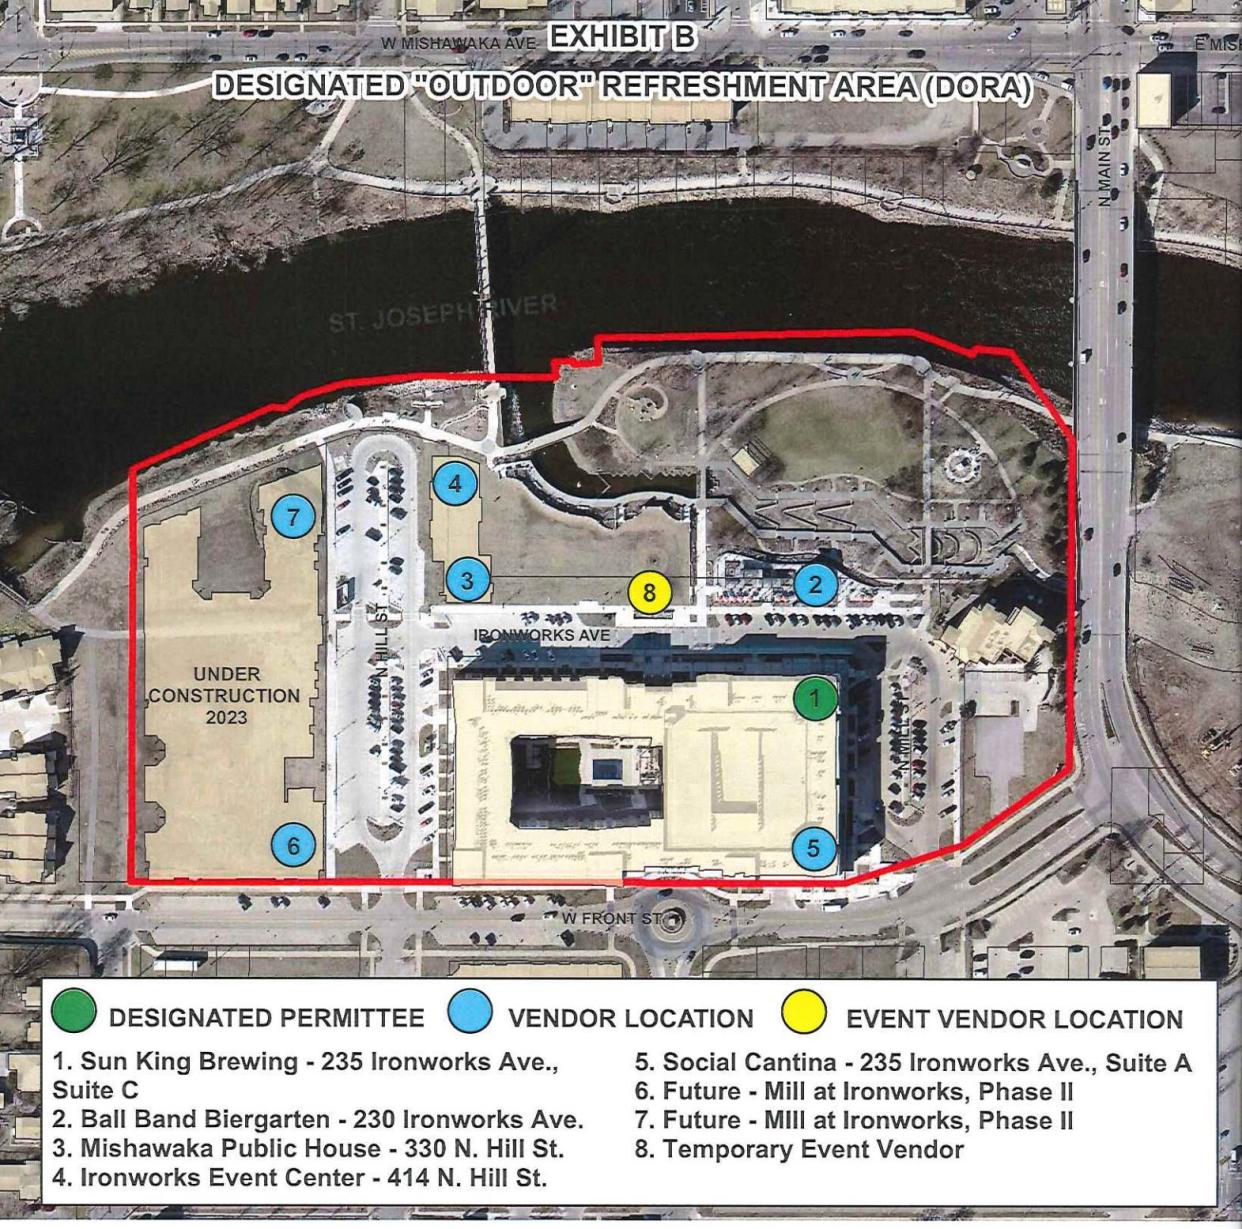 Mishawaka is proposing a Designated Outdoor Refreshment Area (DORA) for the Ironworks Plaza and Beutter Park that would allow people to buy and carry open alcoholic beverages inside the boundaries of the area.